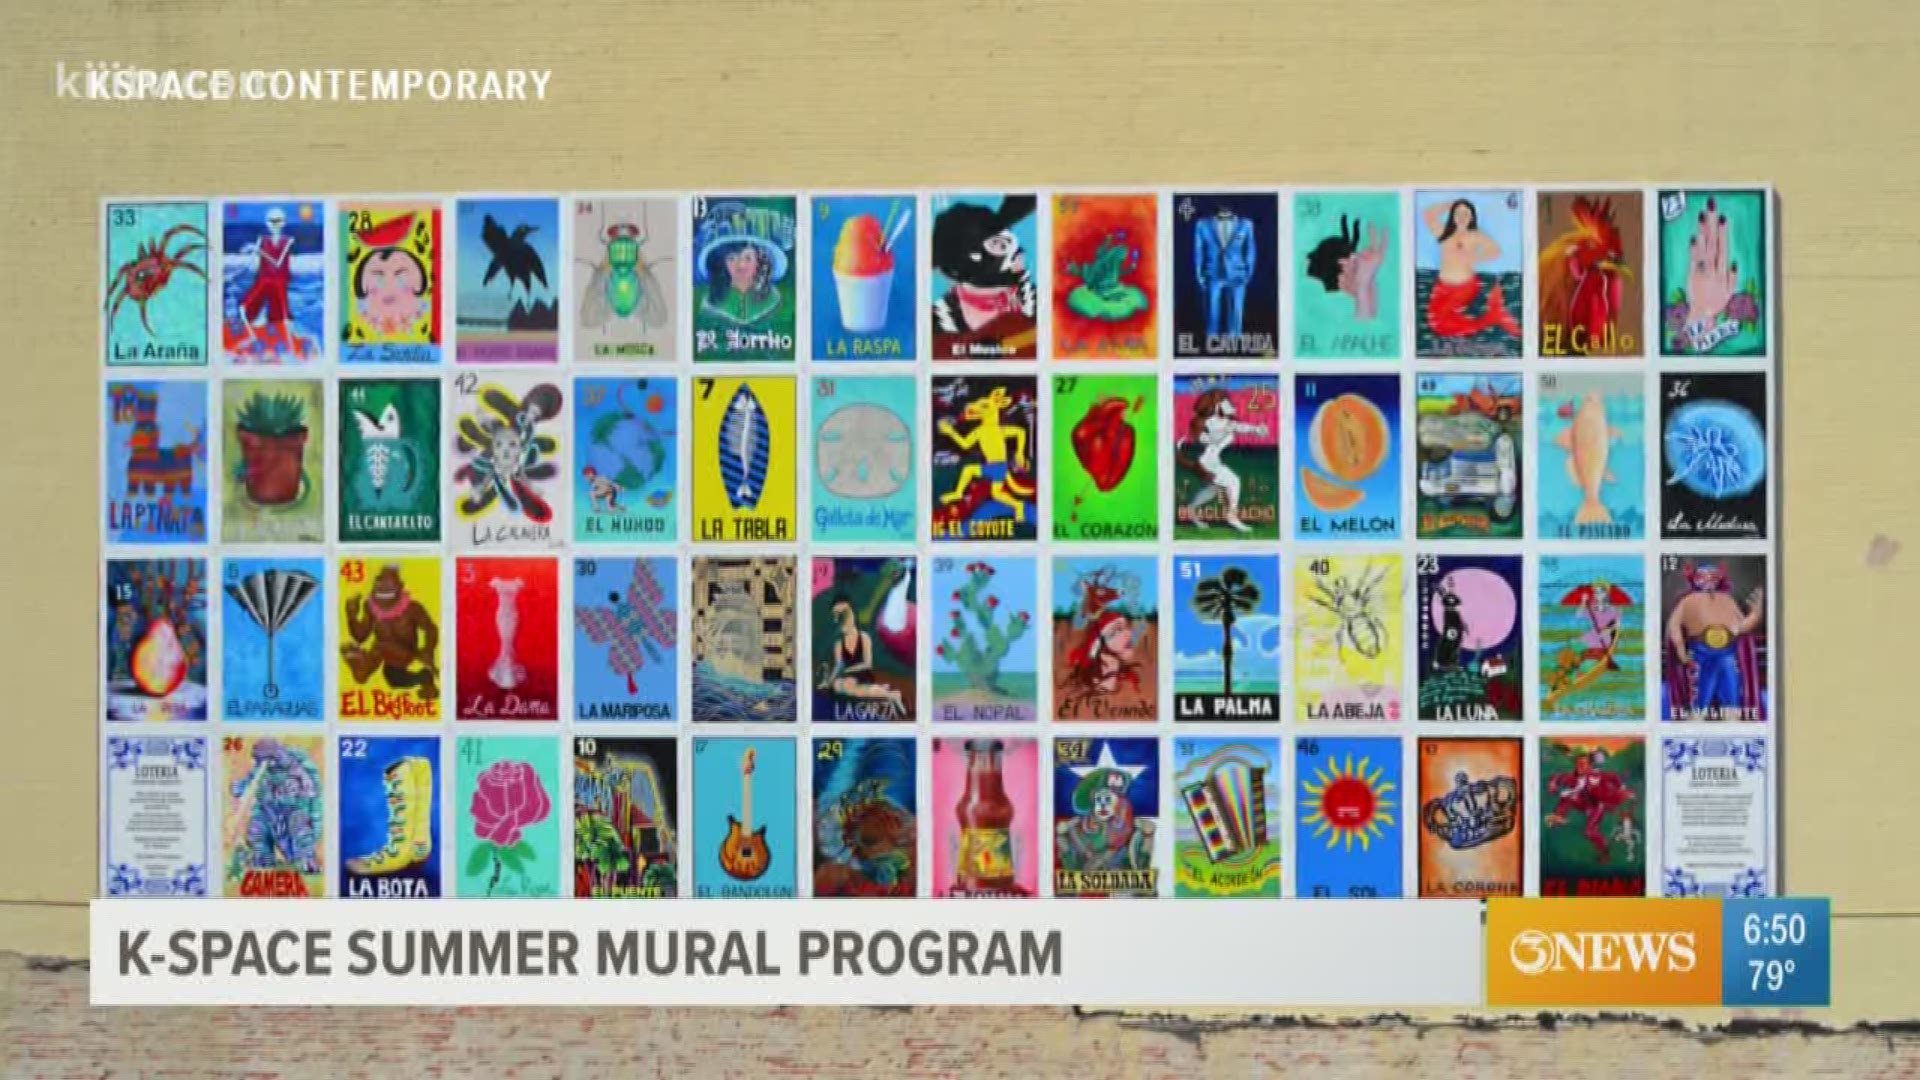 K-Space Contemporary will host the summer mural program.